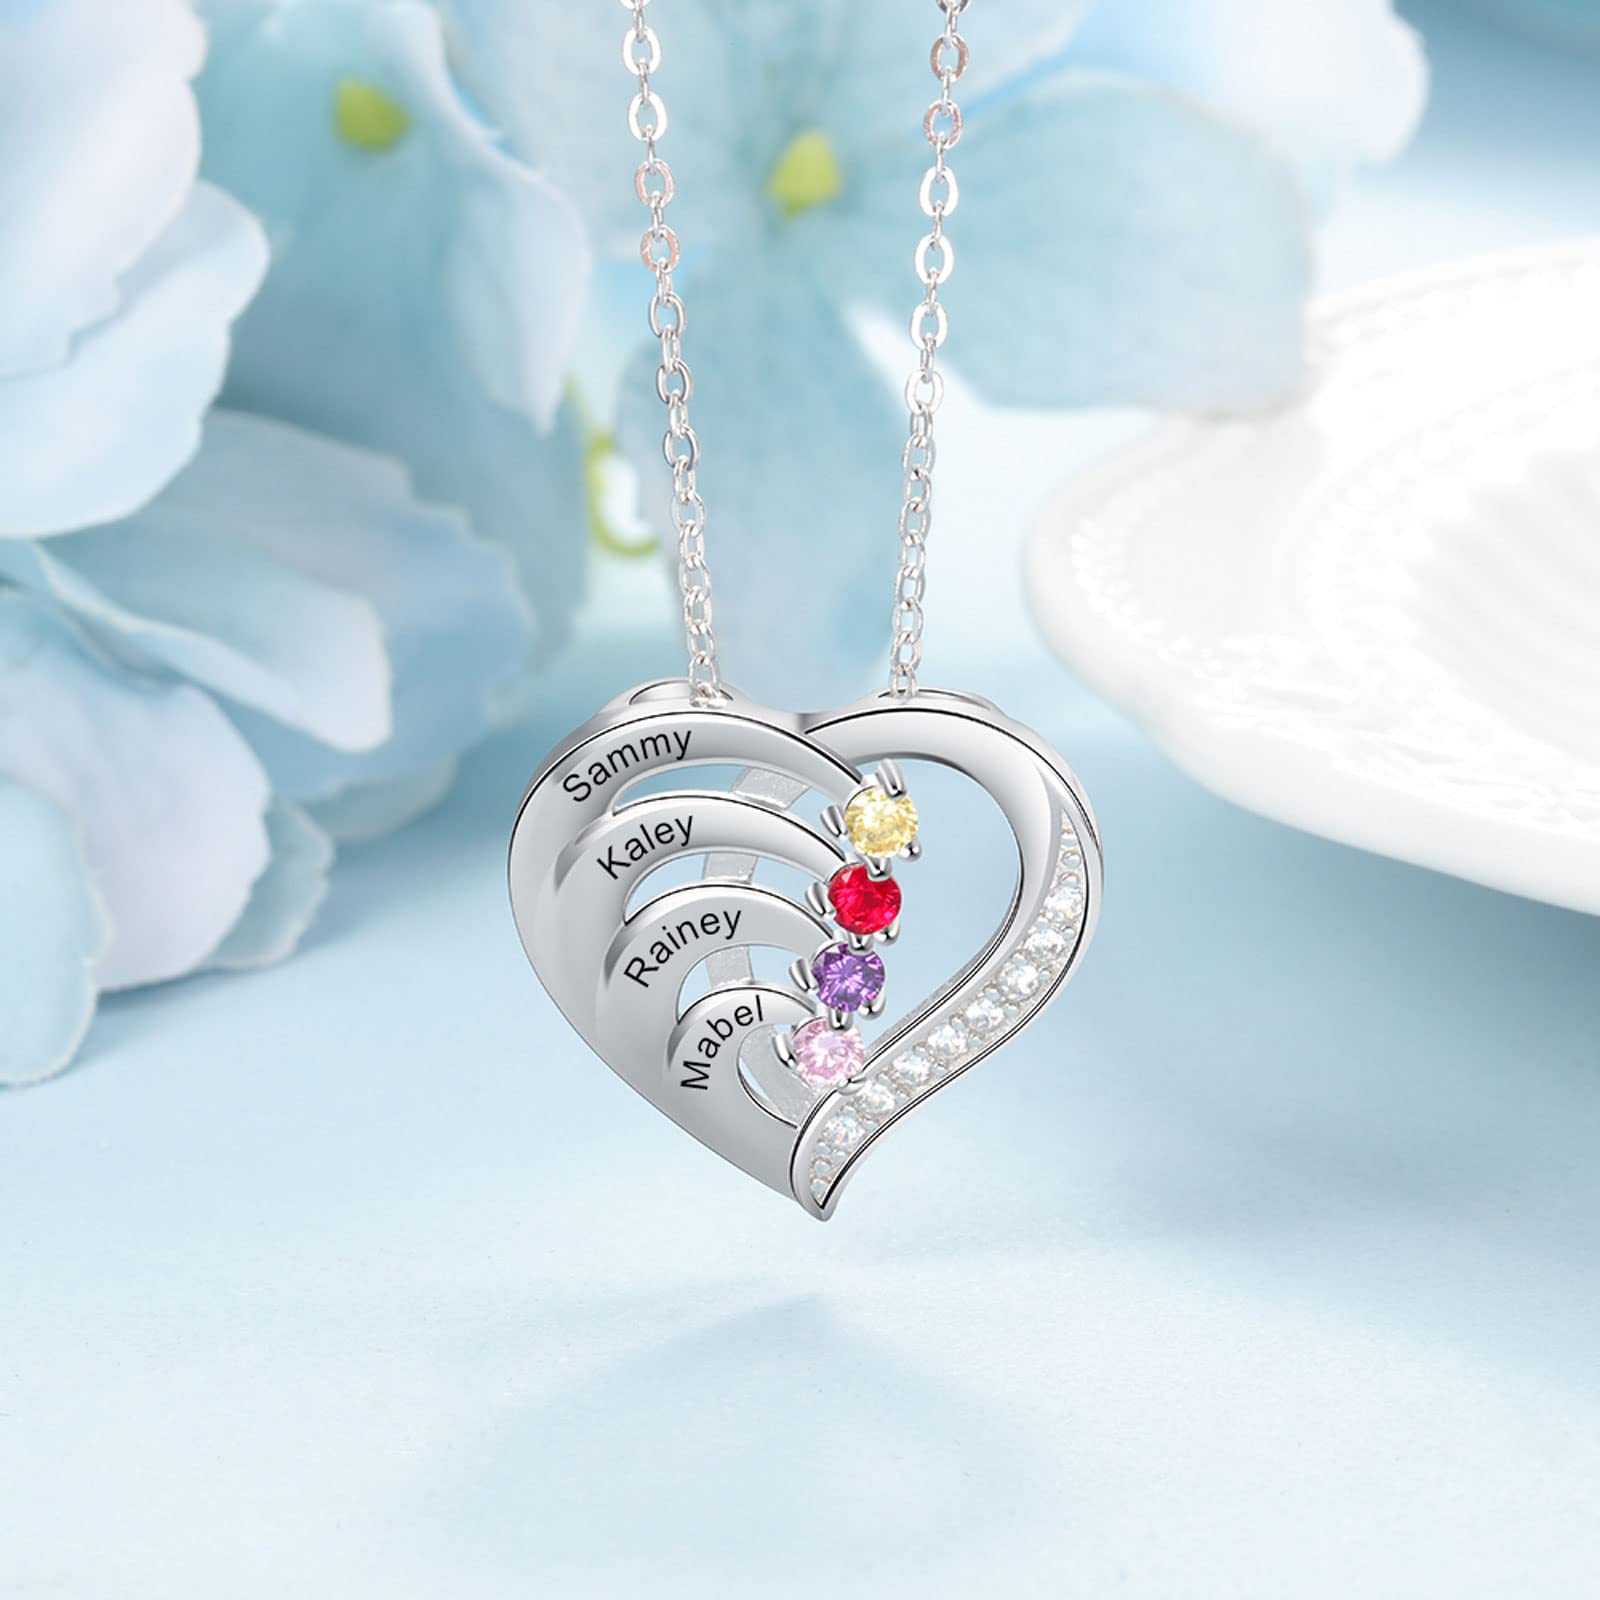 CTIEIP 10K/14K/18K Gold Diamond Personalized Name Heart Necklace with 1-4 Birthstones Real Diamond Engraved 1-4 Names Pendant Jewelry Gift for Mom